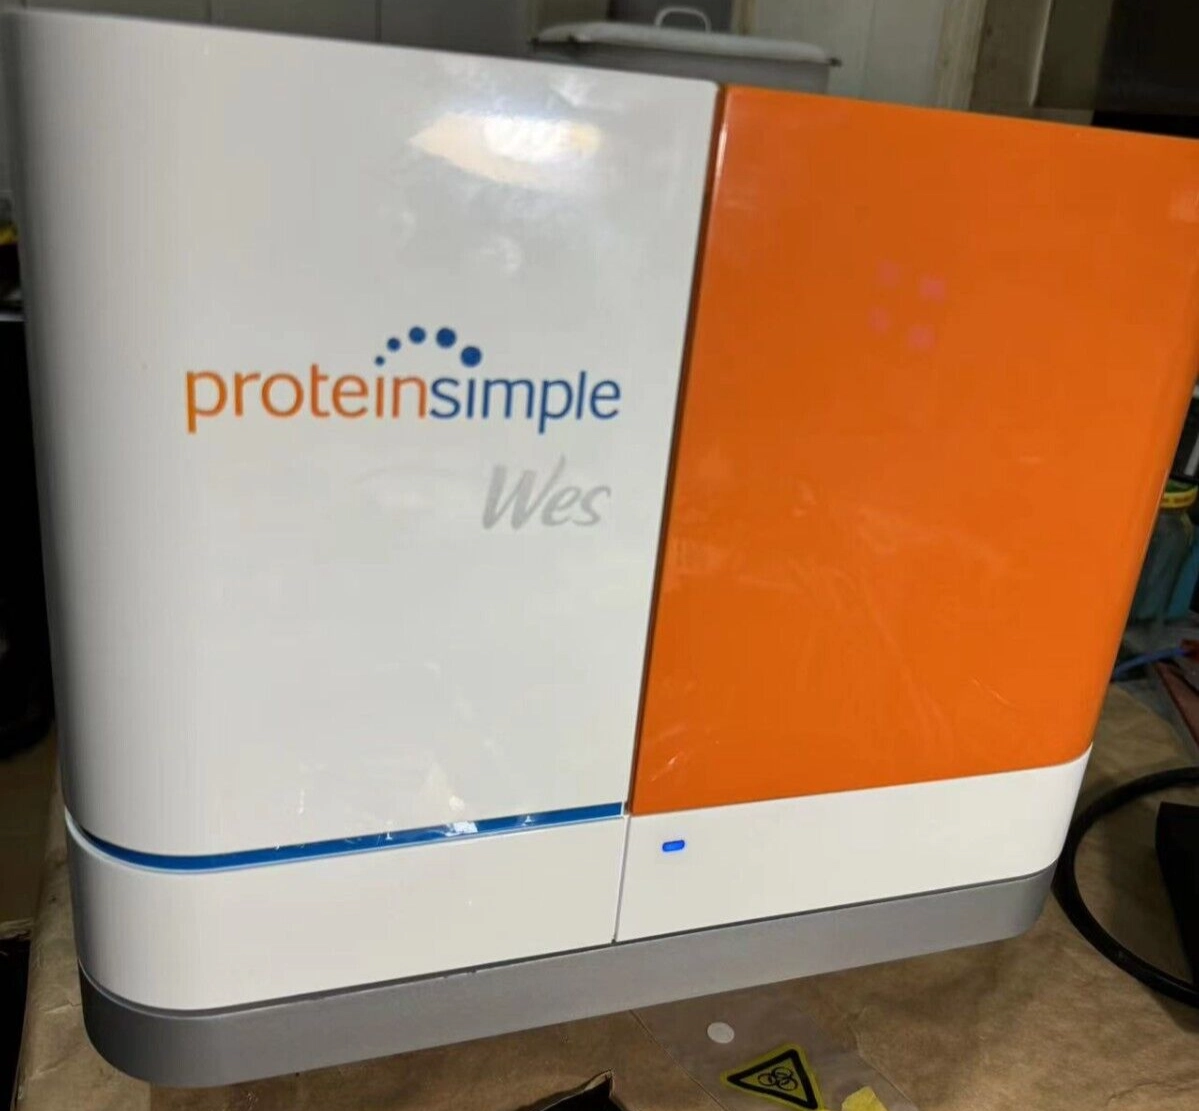 ProteinSimple Repair & PM &Calibrtion for ProteinS